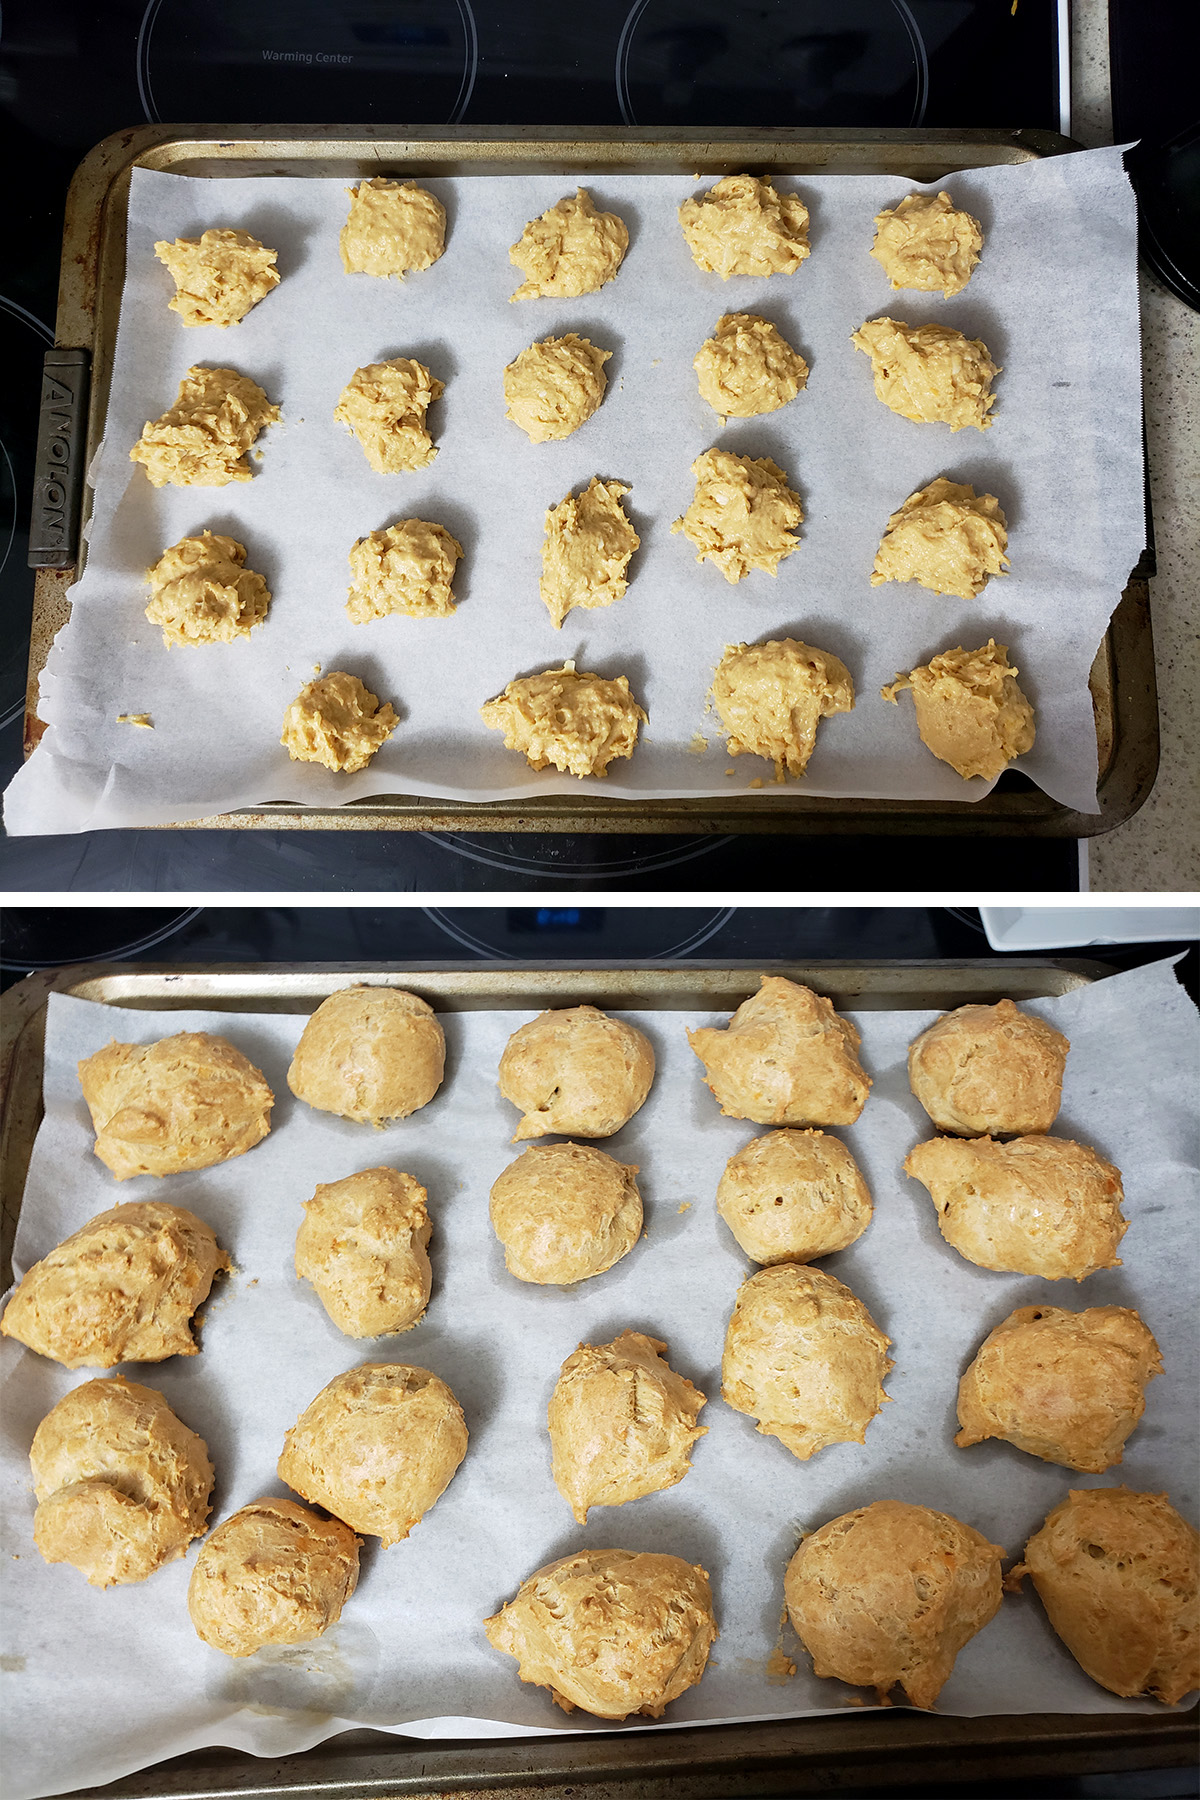 A two part compilation image showing the dough spooned out on a prepared pan, and the finished cheese puffs, fresh from the oven.